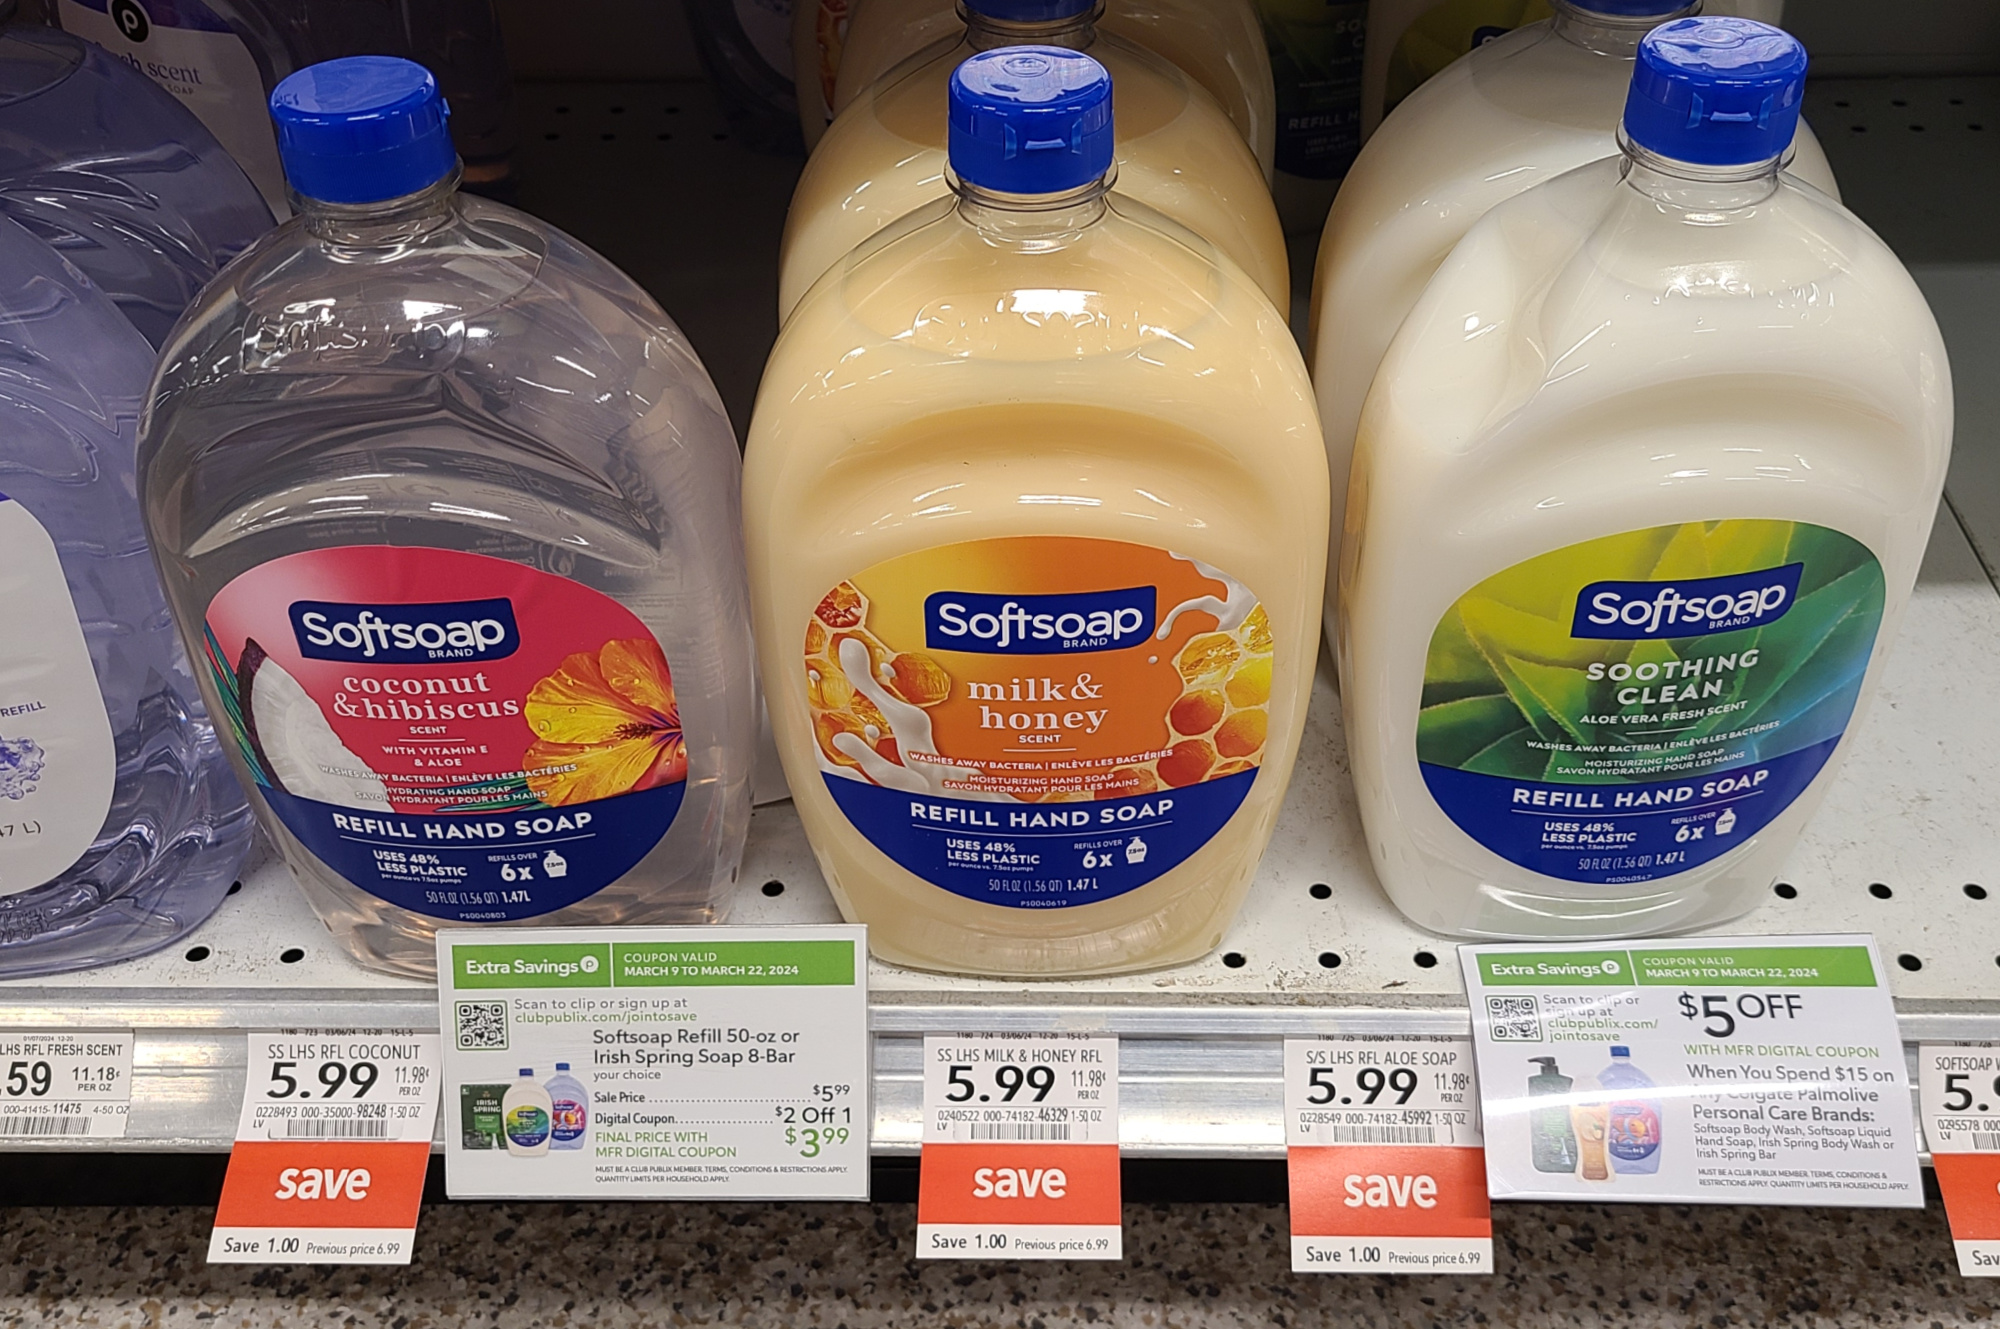 Cacique Products As Low As $2.50 At Publix - iHeartPublix